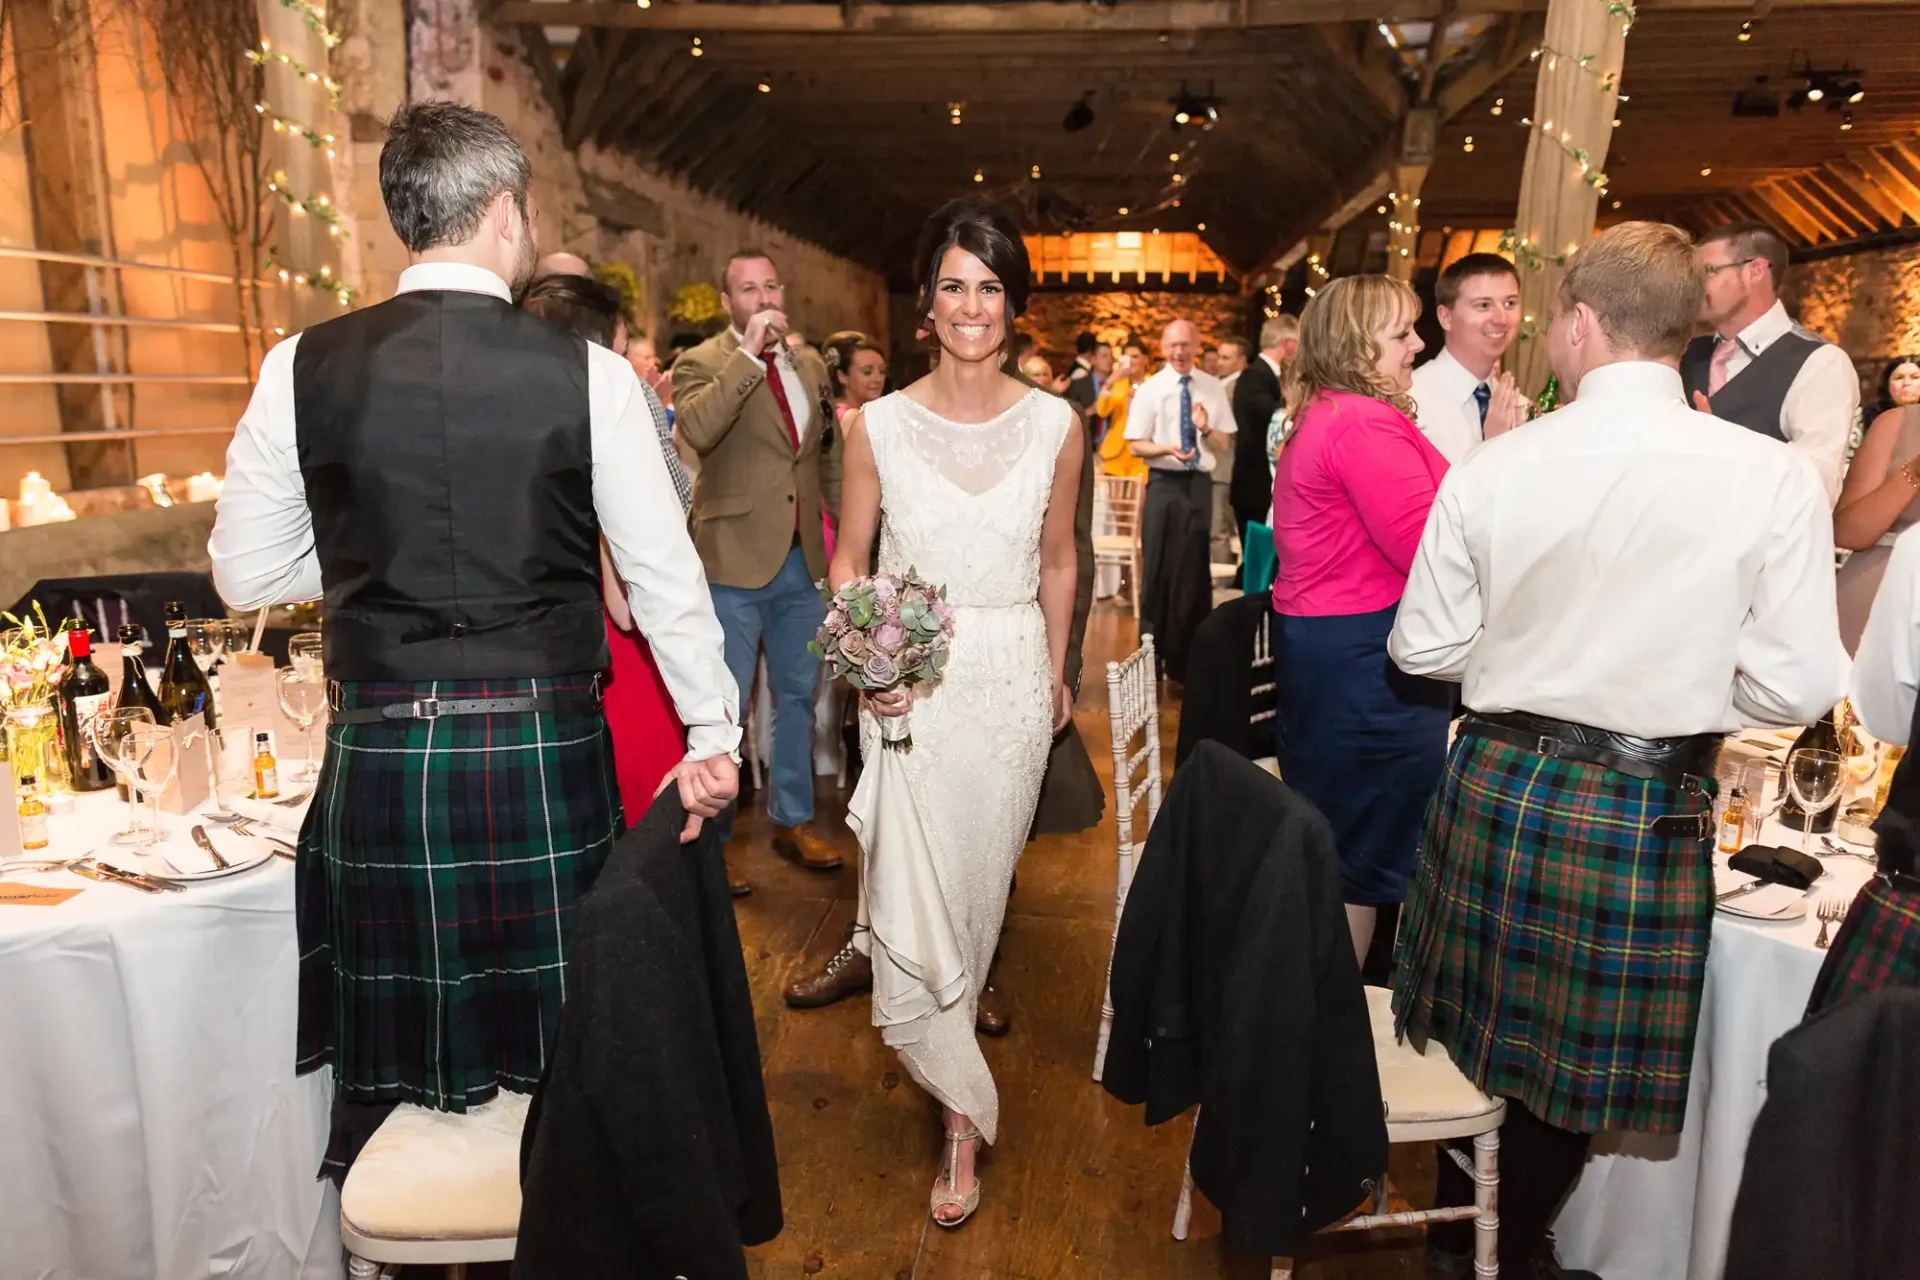 Bride walking through wedding reception hall, guests clapping, two men in kilts facing her. warm lighting and rustic decor.